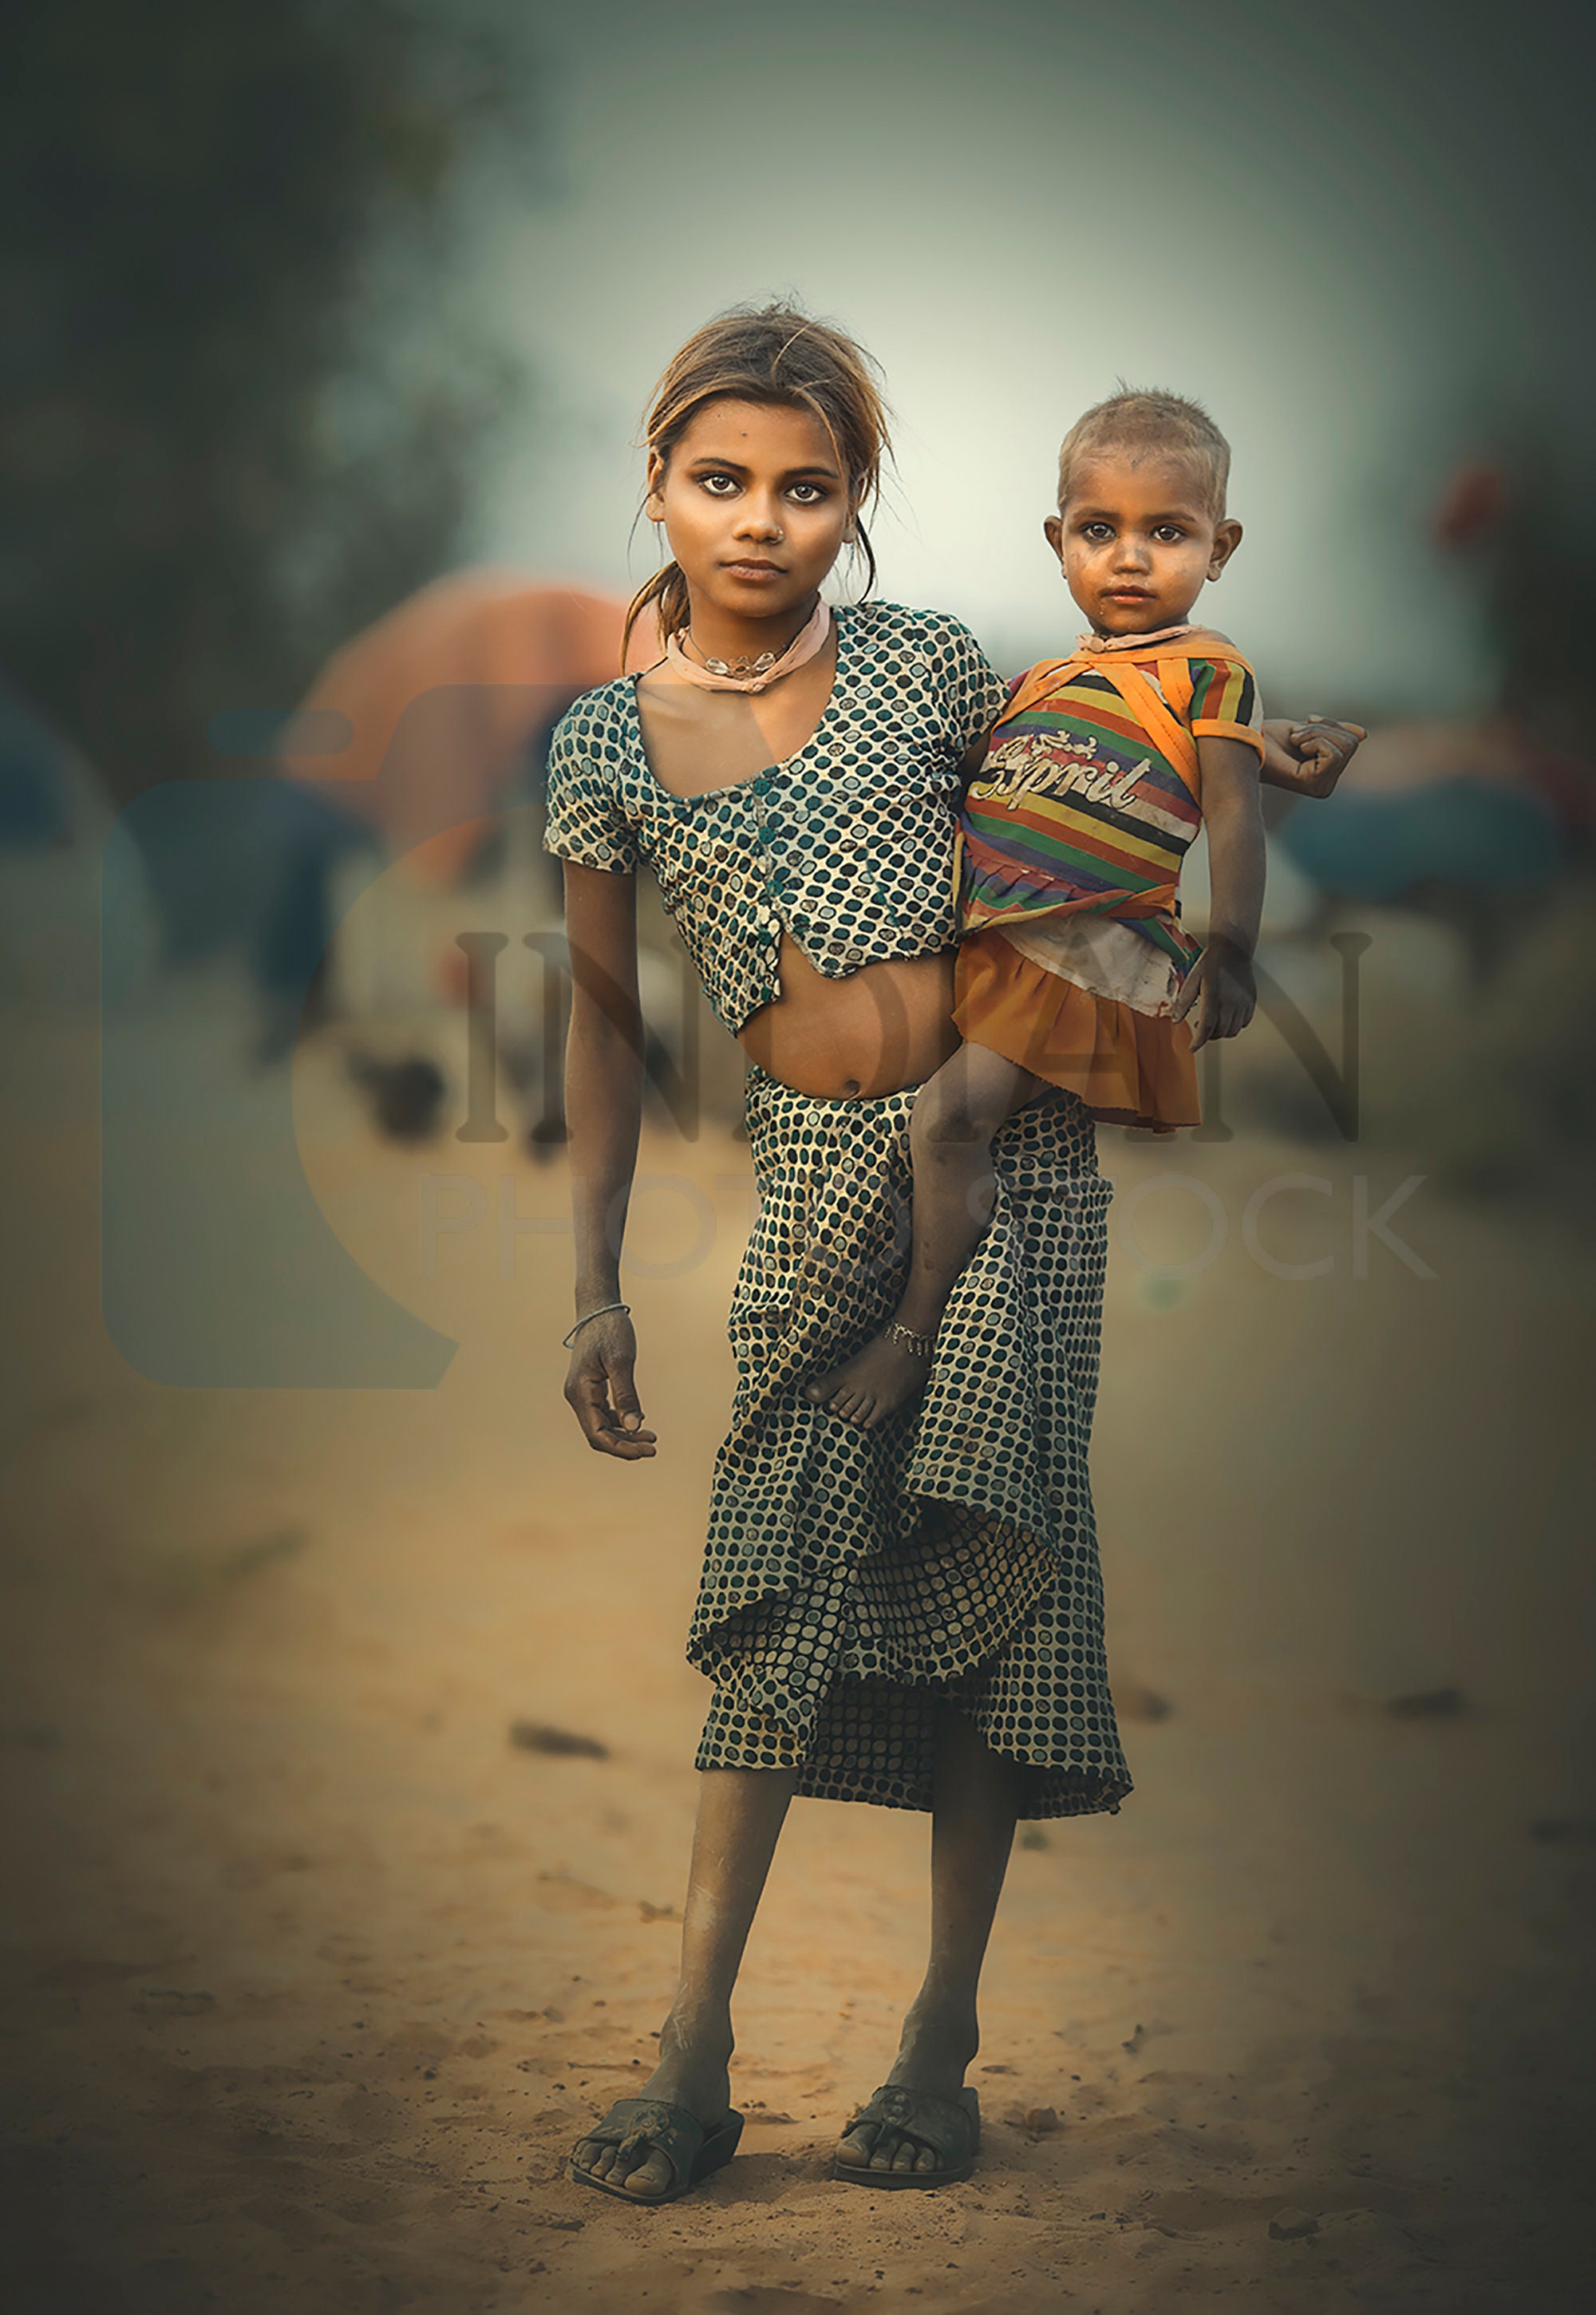 Indian Village Girl Feeding Her Younger Sister In Her Arms Etsy India 